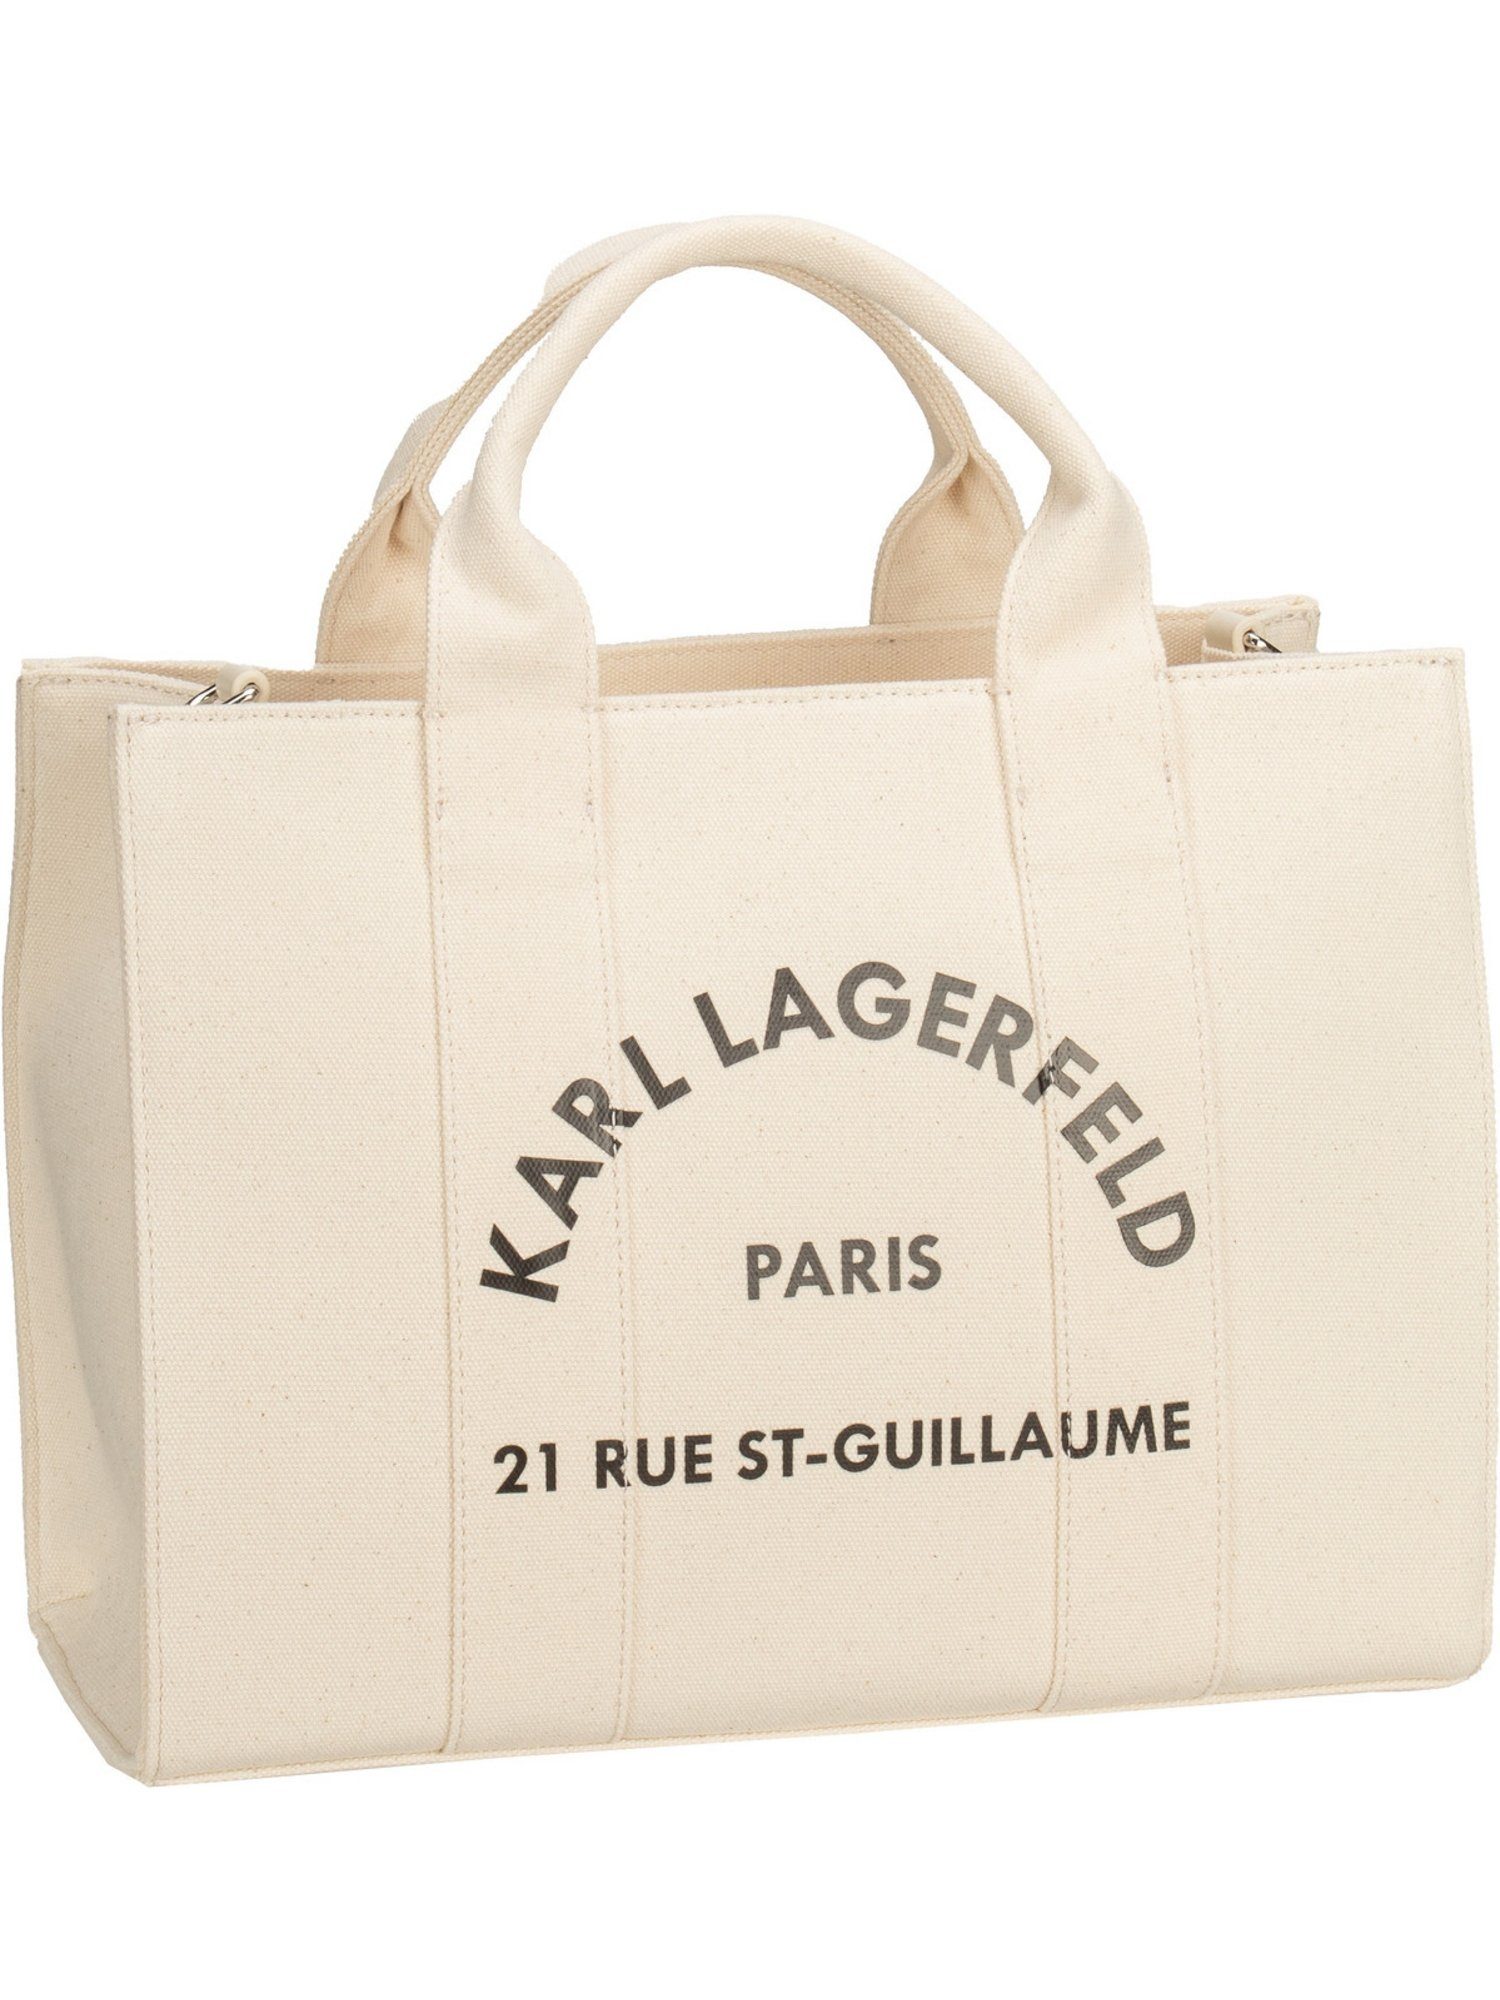 KARL LAGERFELD Handtasche RSG Square MD Tote, Tote Bag